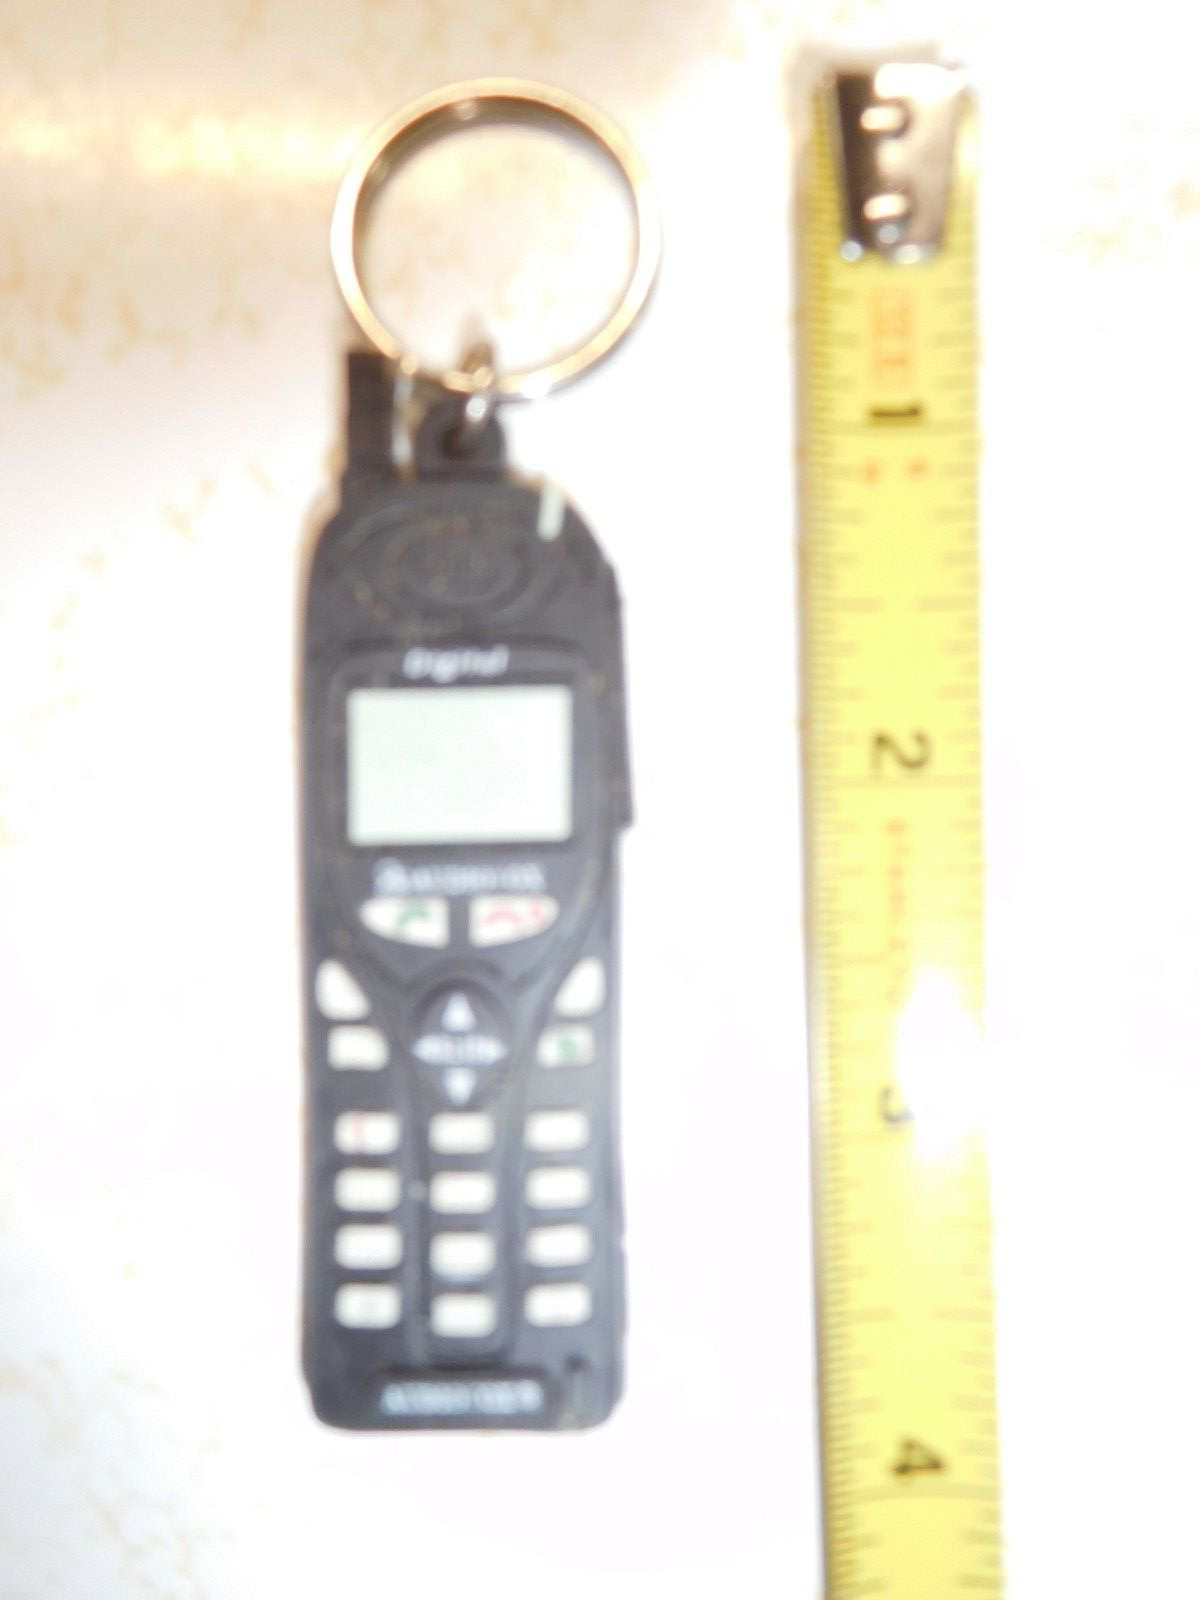 Vintage Audiovox Brick Cell Phone Rubber KeyChain